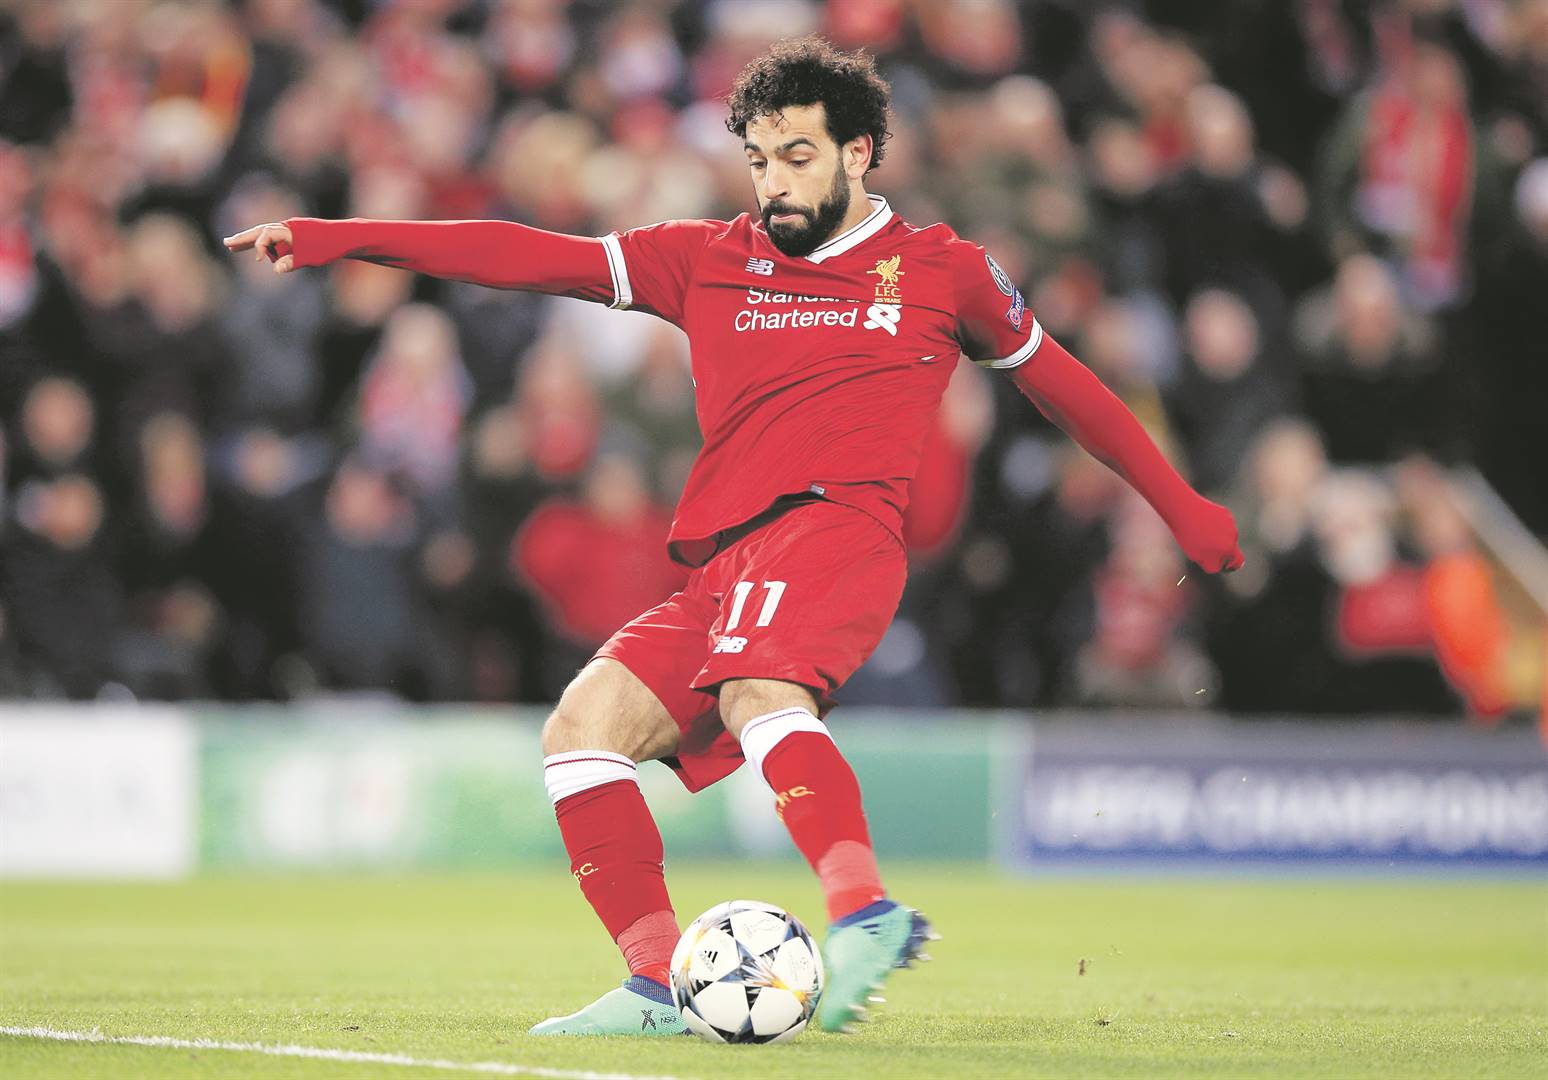 Liverpool's Mohamed Salah poses the biggest threat to Manchester United. Picture: pa images